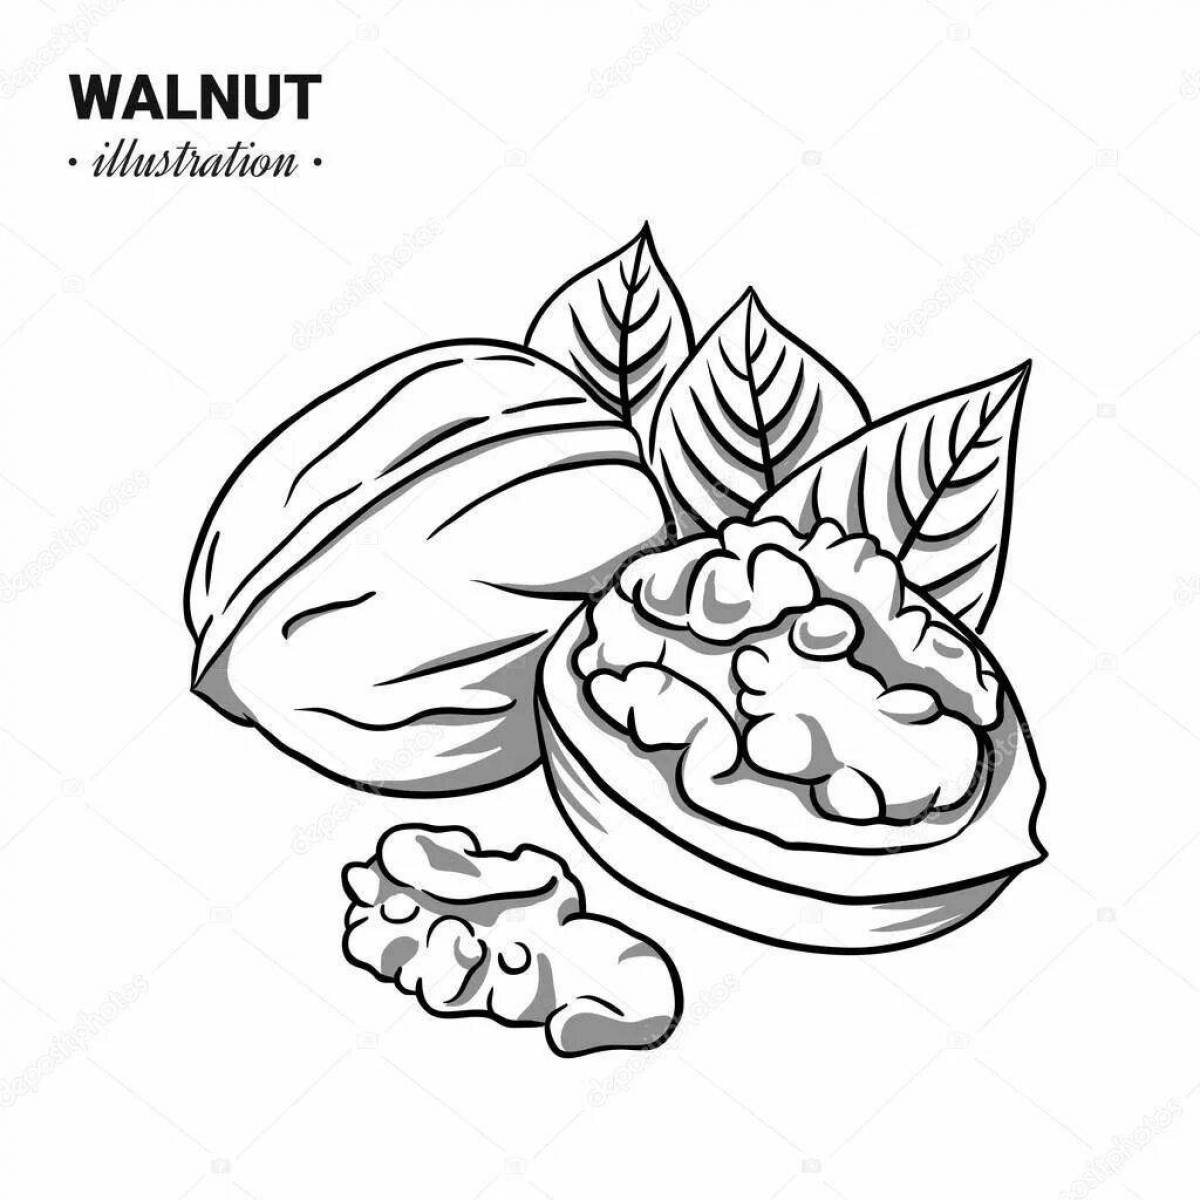 Delightful walnut coloring page